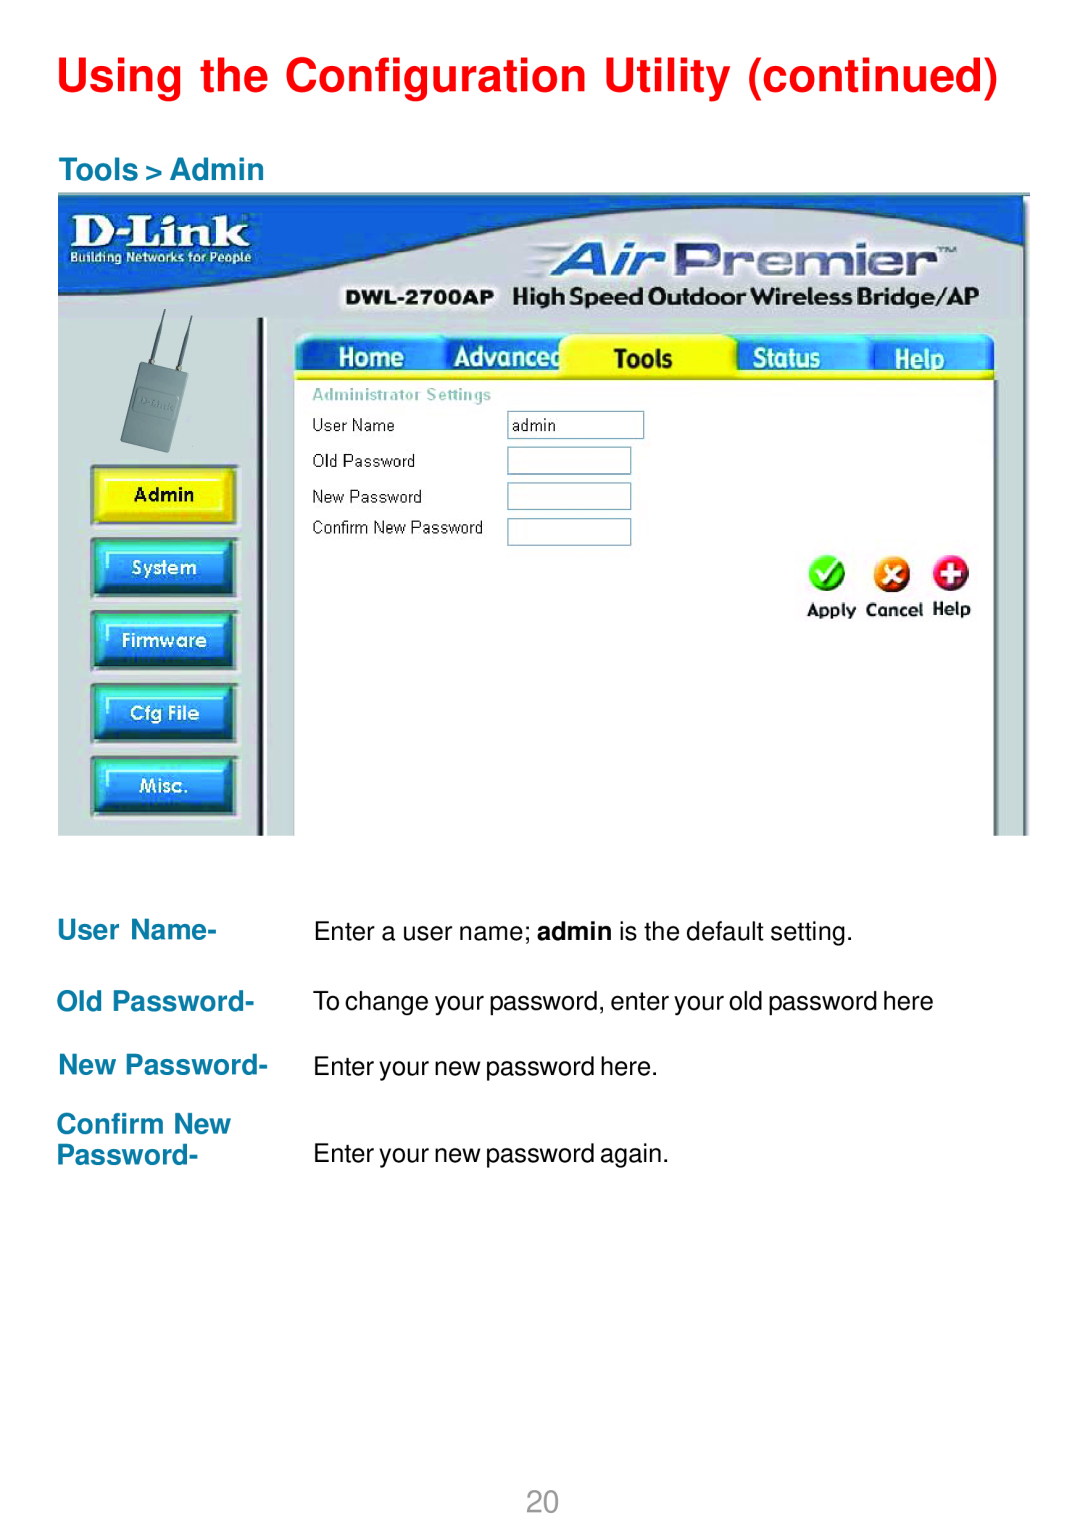 D-Link DWL-2700AP warranty Tools Admin, User Name, Old Password, Confirm New, Using the Configuration Utility continued 